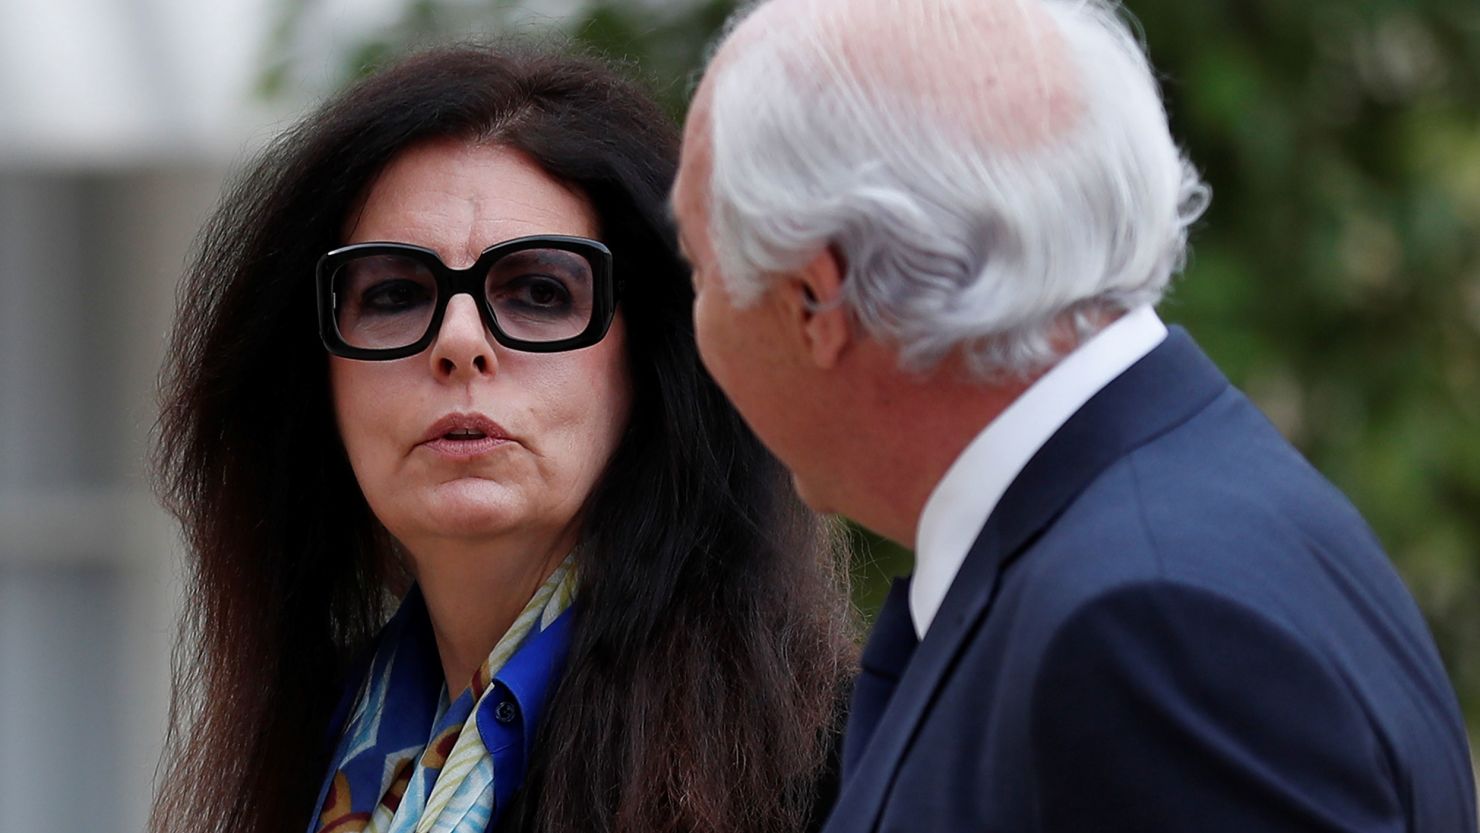 Francoise Bettencourt Meyers, daughter and heiress of Lilianne Bettencourt, arrives at the Elysee Palace for a ceremony marking the 50th anniversary of the election of late French President Georges Pompidou, in Paris, France, June 19, 2019.  Ian Langsdon/Pool via REUTERS